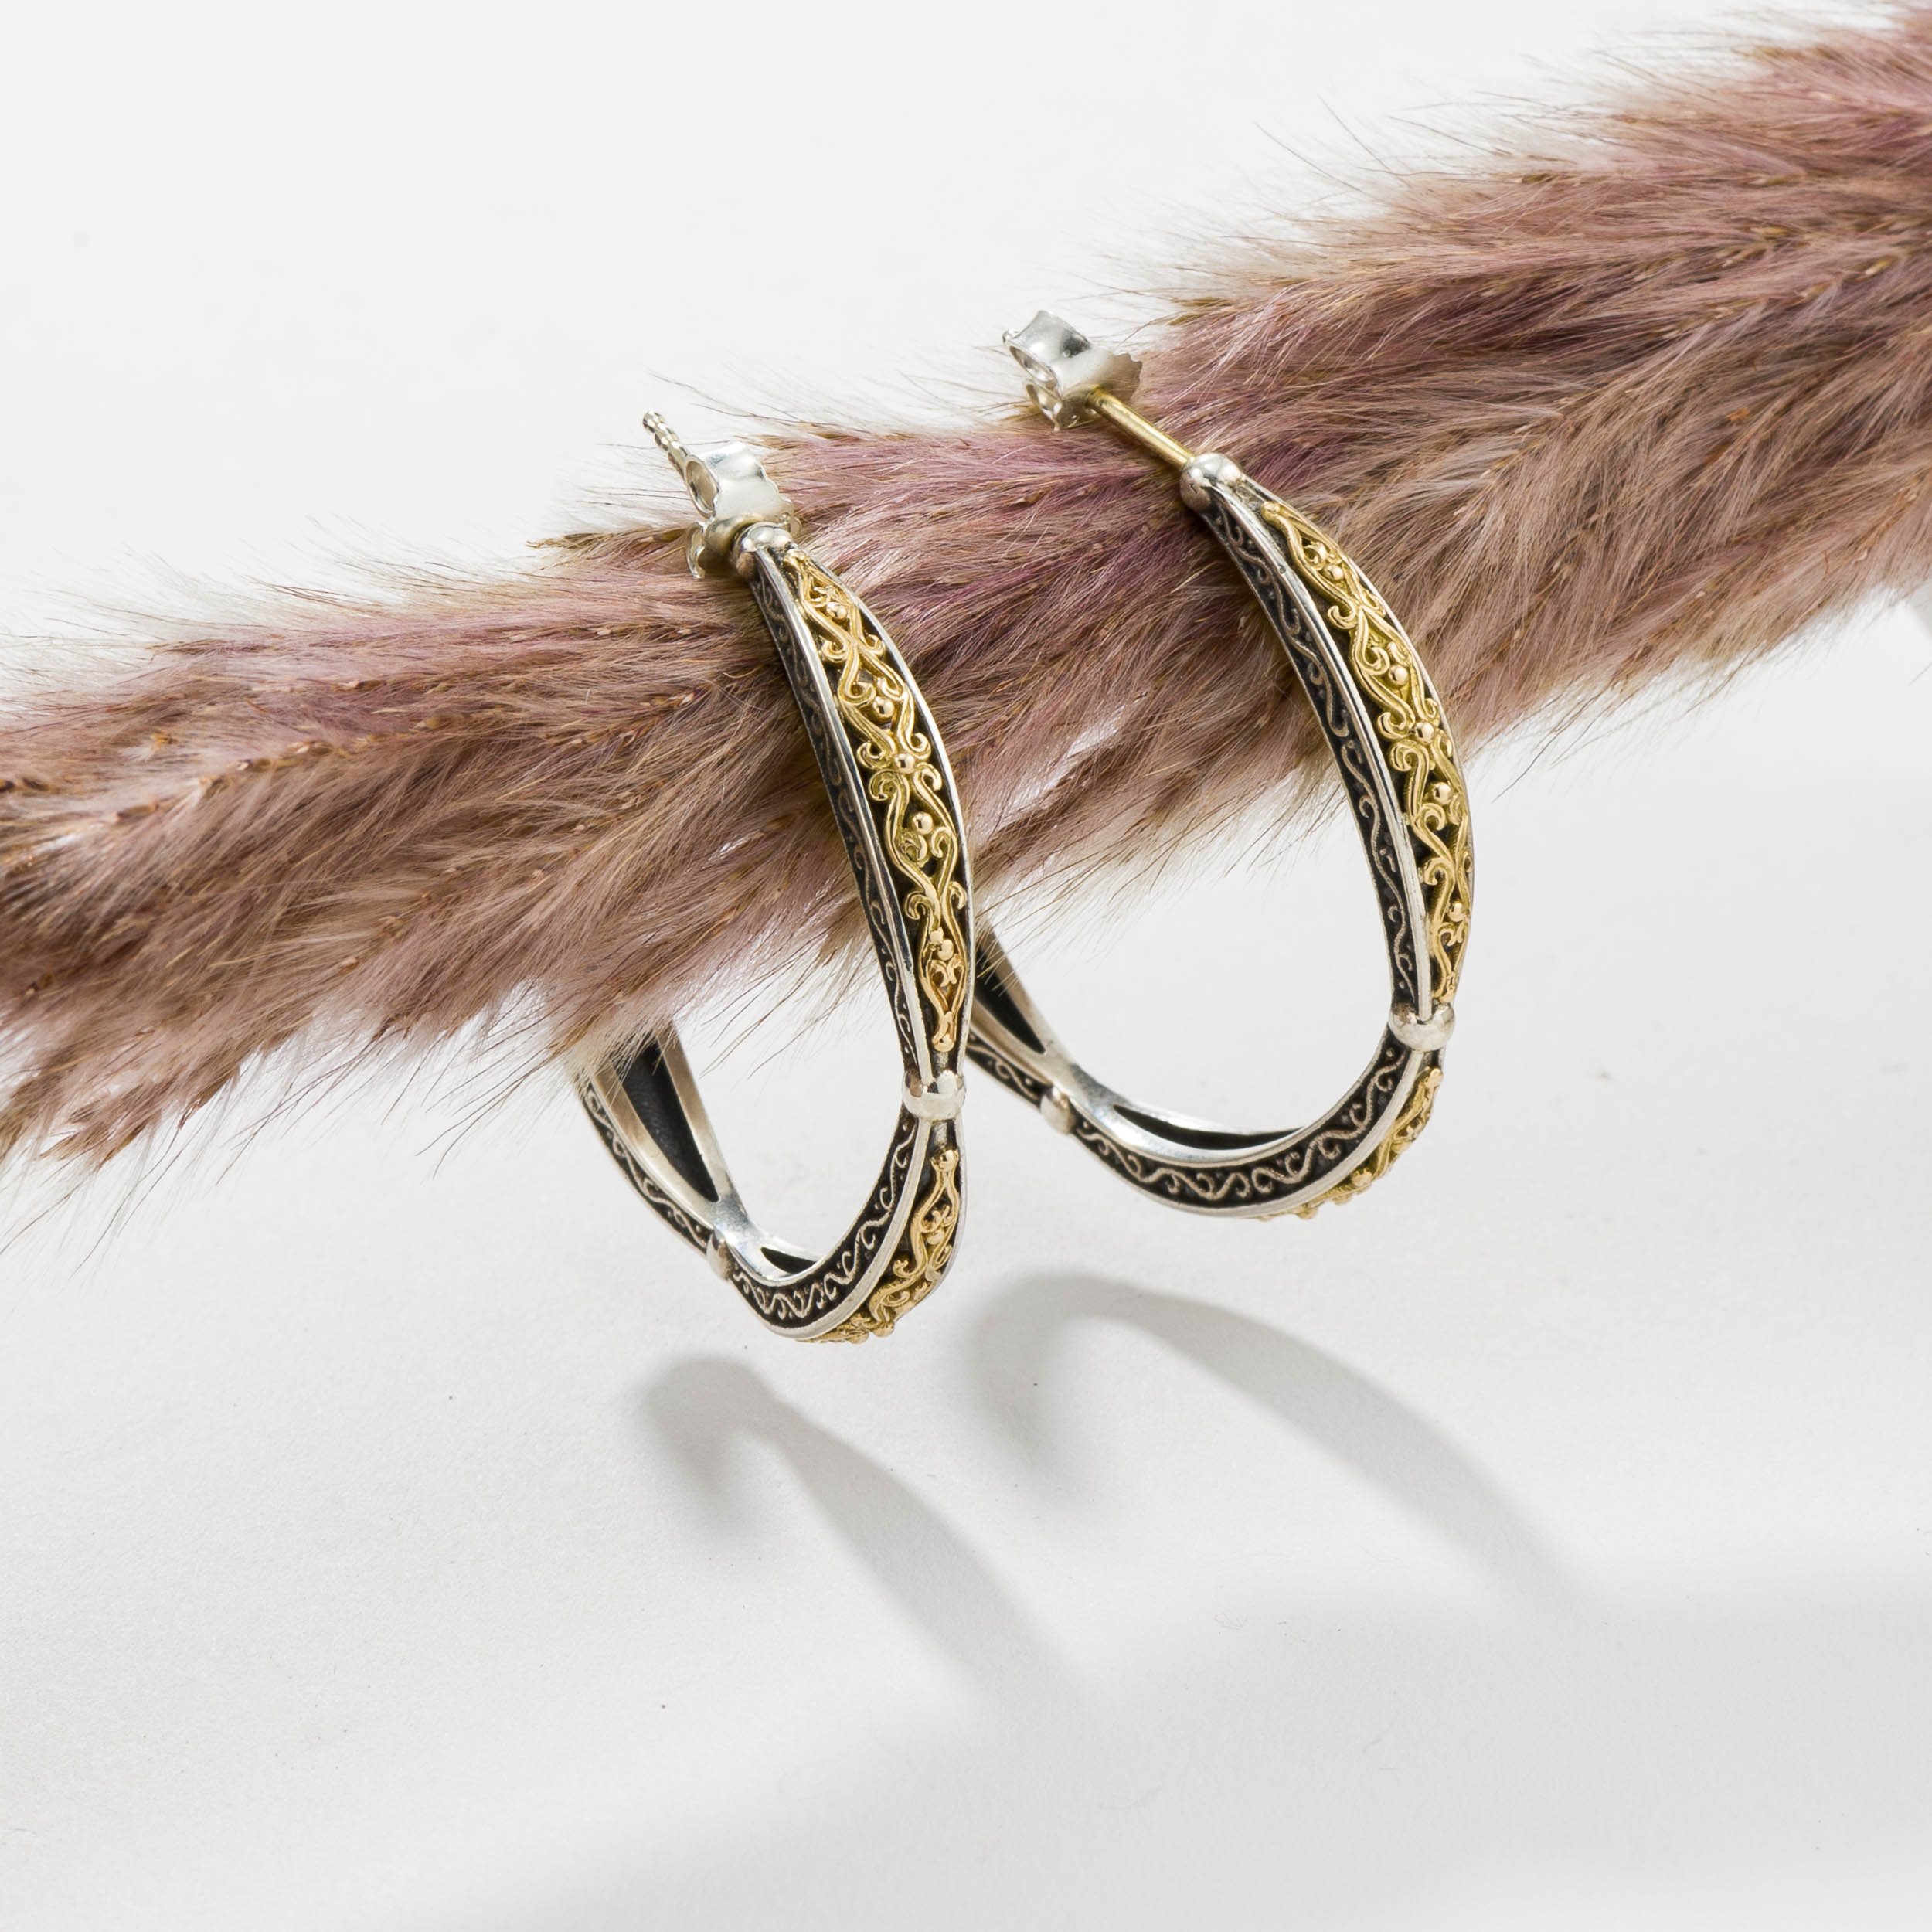 Aretousa Hoops earrings in 18K Gold and Sterling Silver